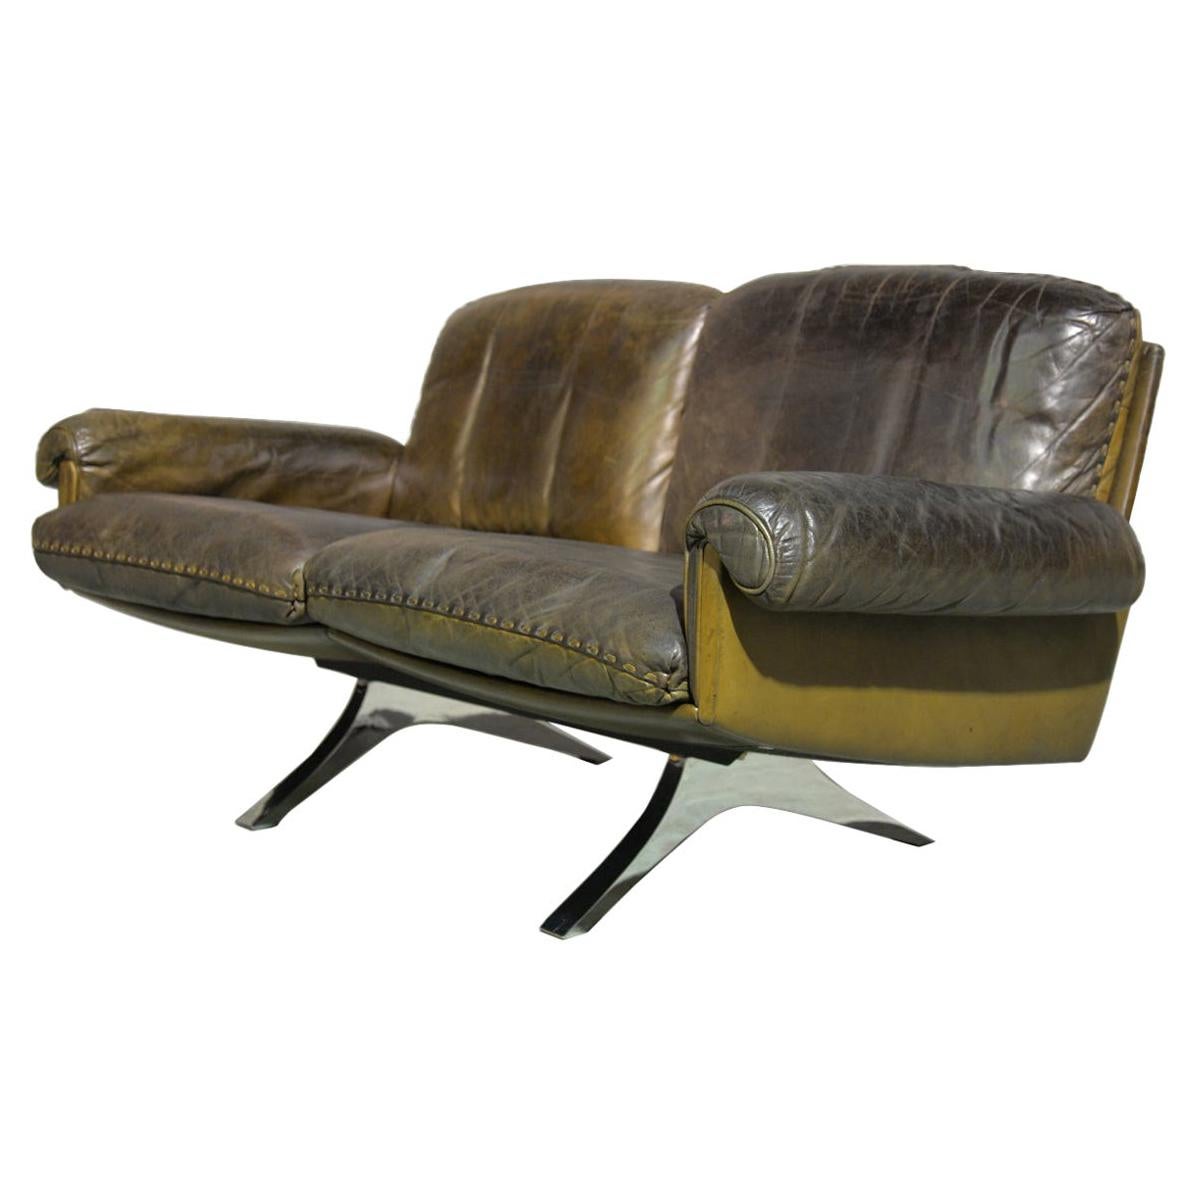 Vintage De Sede DS 31 Leather Two-Seat Sofa or Loveseat, Switzerland, 1970s